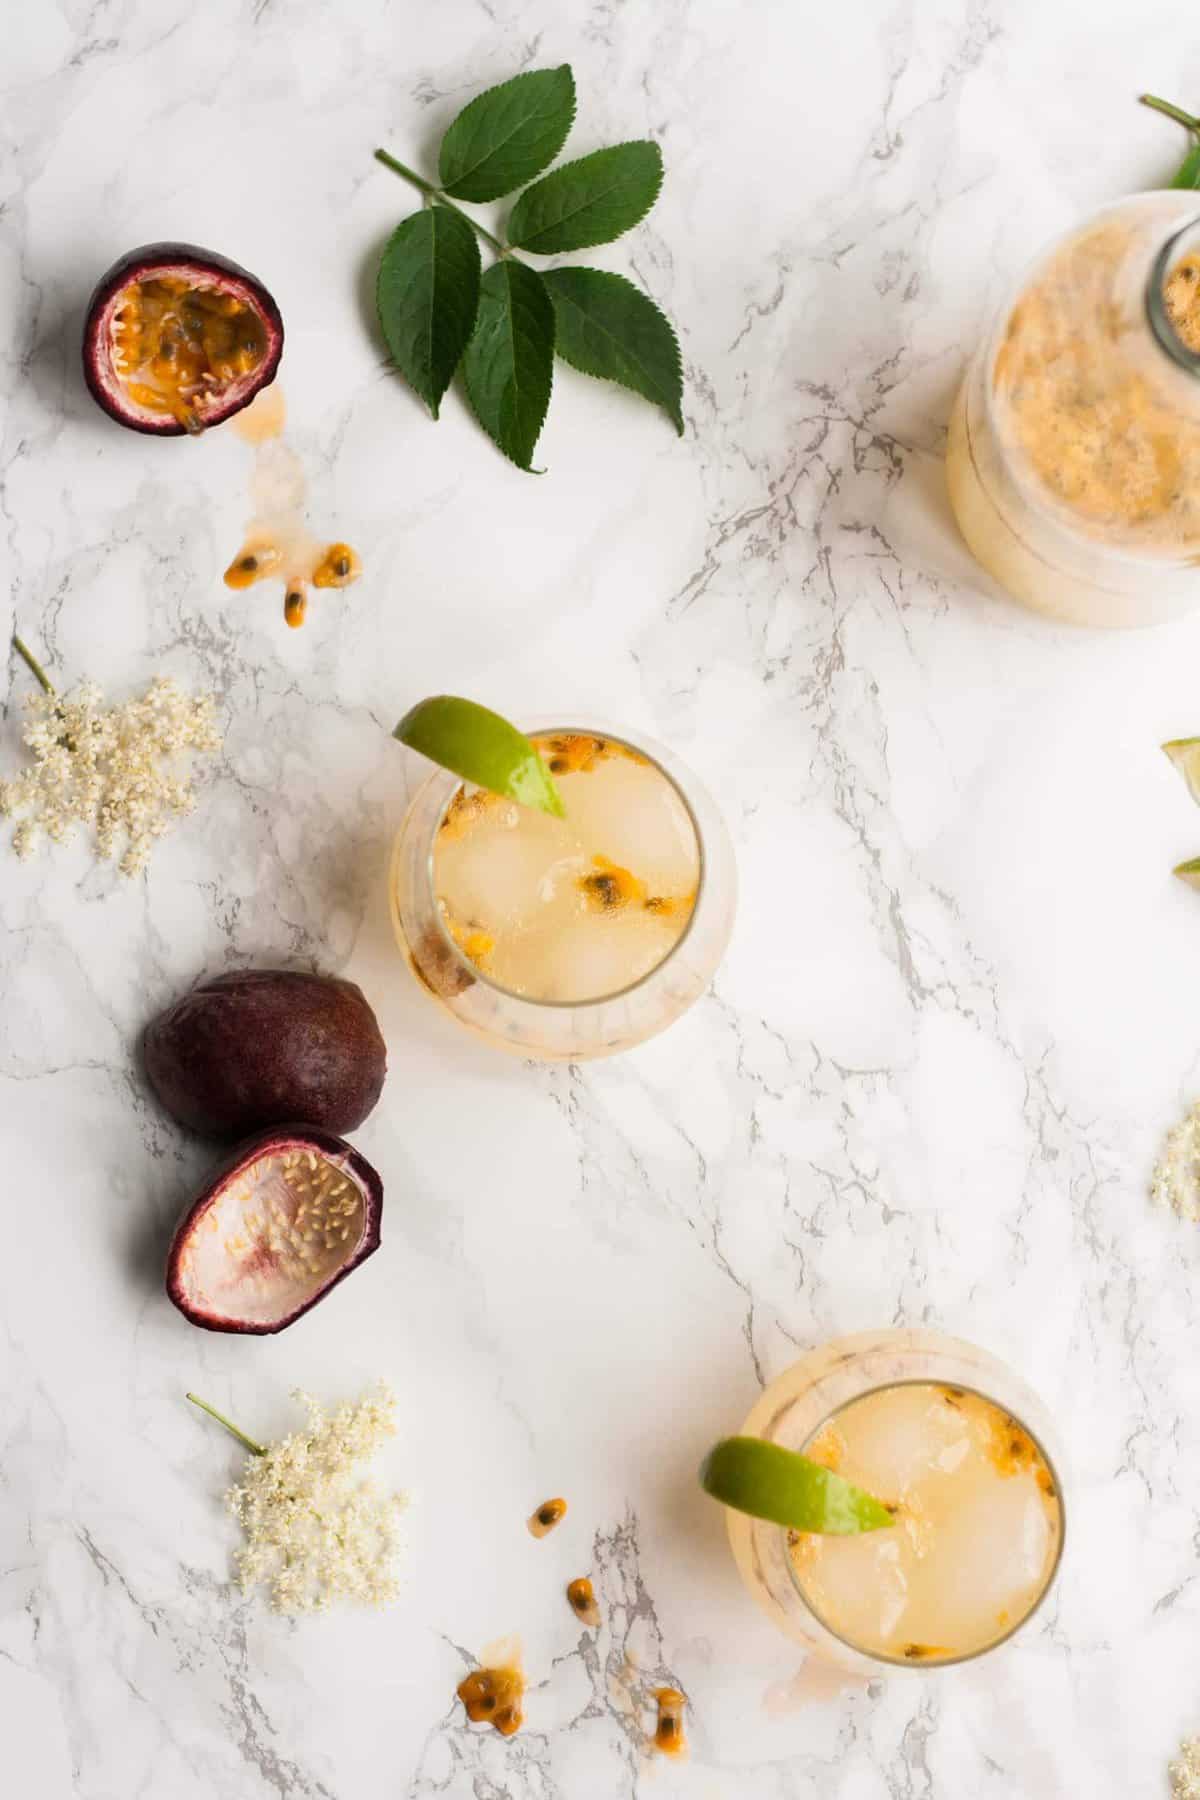 A glass of passionfruit mocktail with a lime wedge on the edge on a marble background.